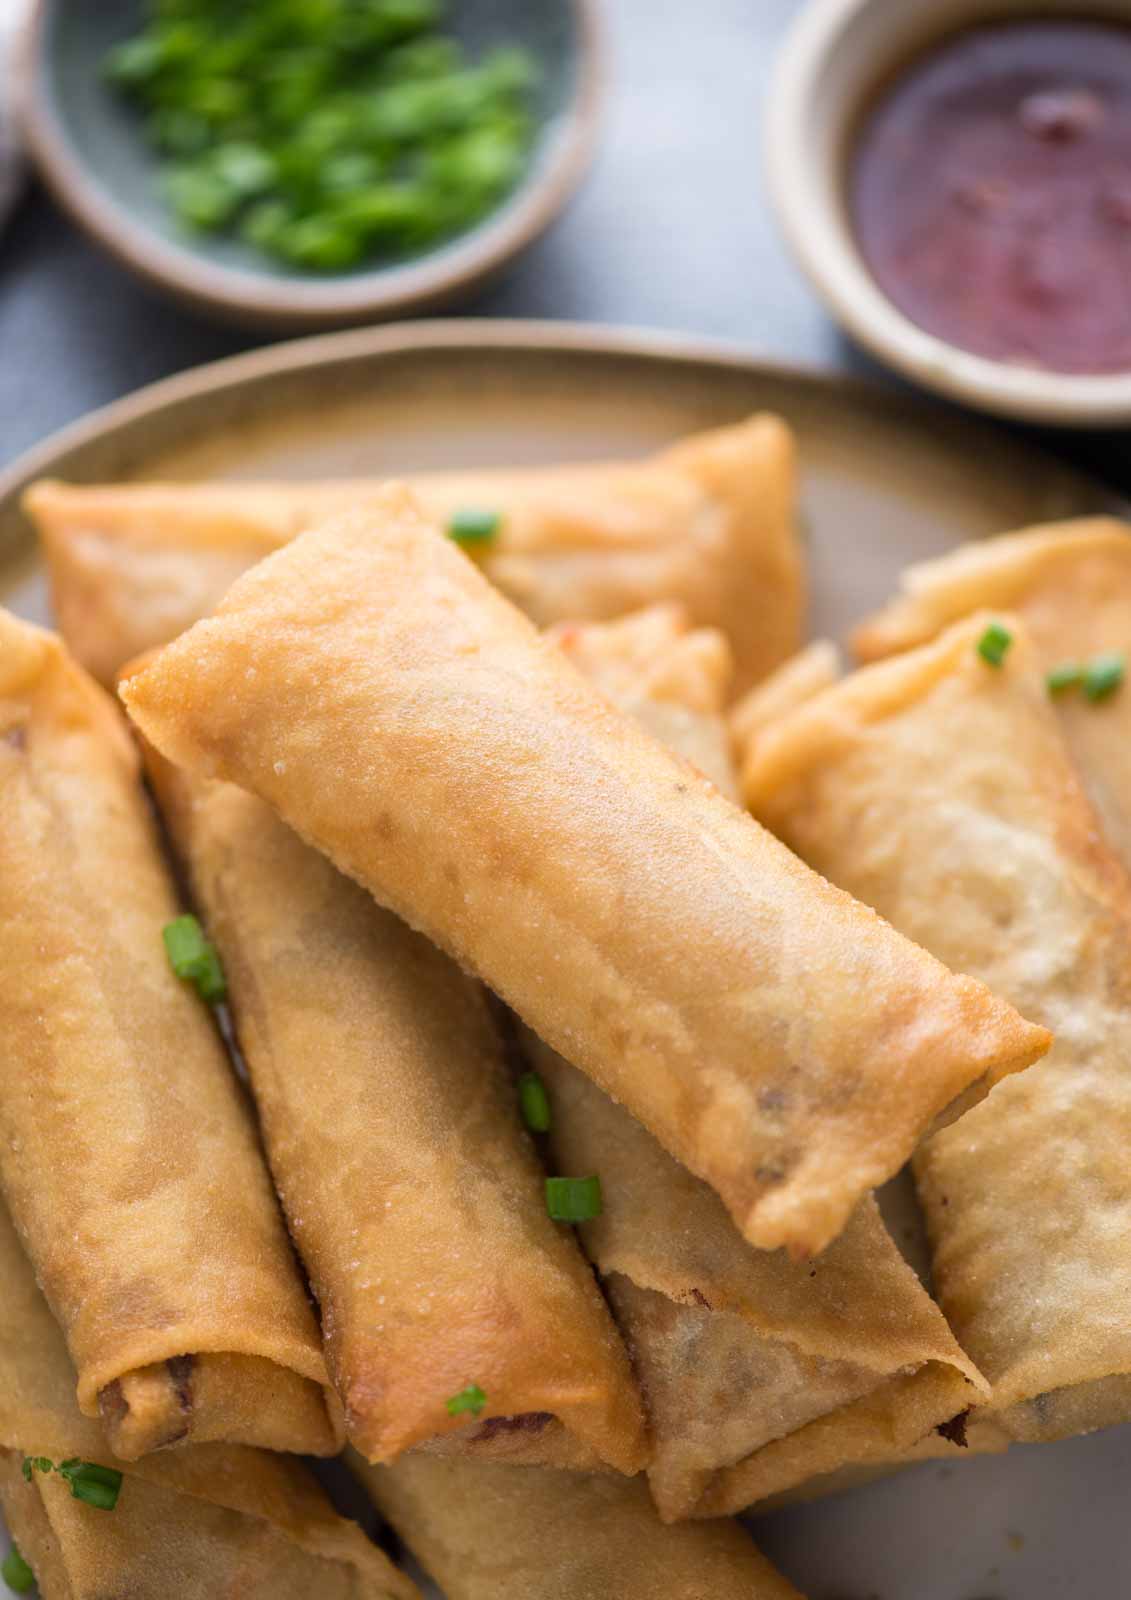 A plate of chicken spring rolls done in both ways - Air-fried and deep-fried, with dipping sauce. Flaky and shatteringly crispy.